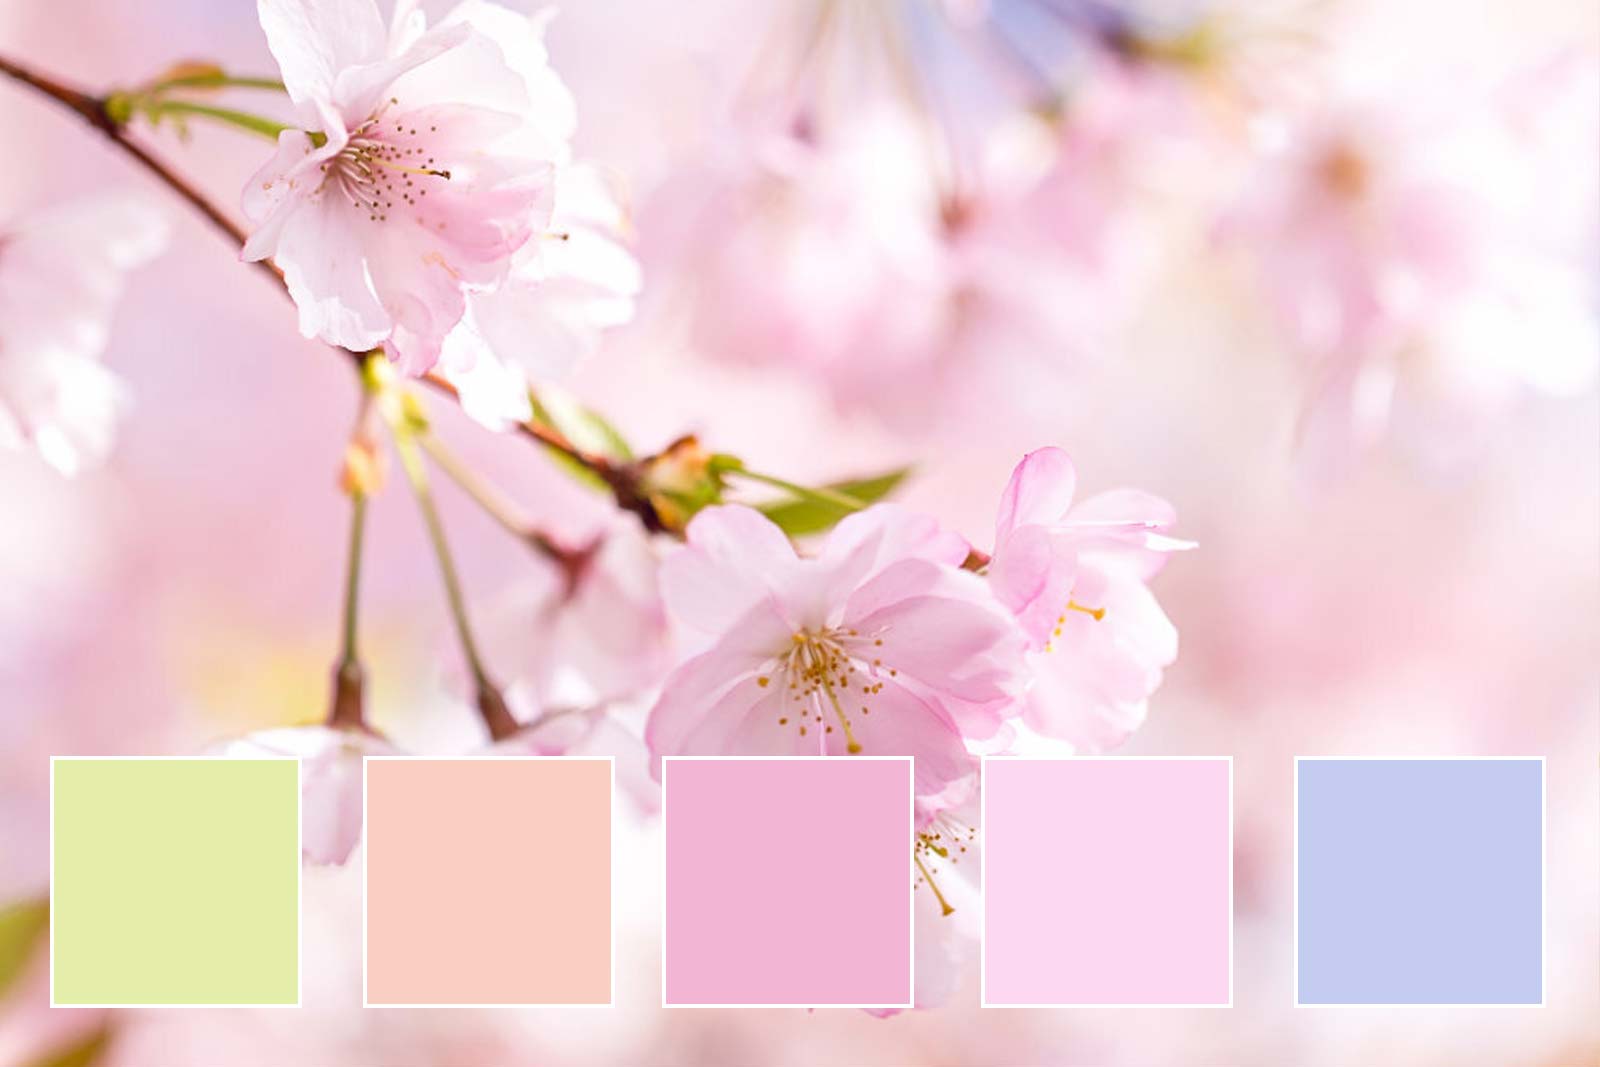 You got: Ethereal Blossom! What Is Your Spring Color Palette?